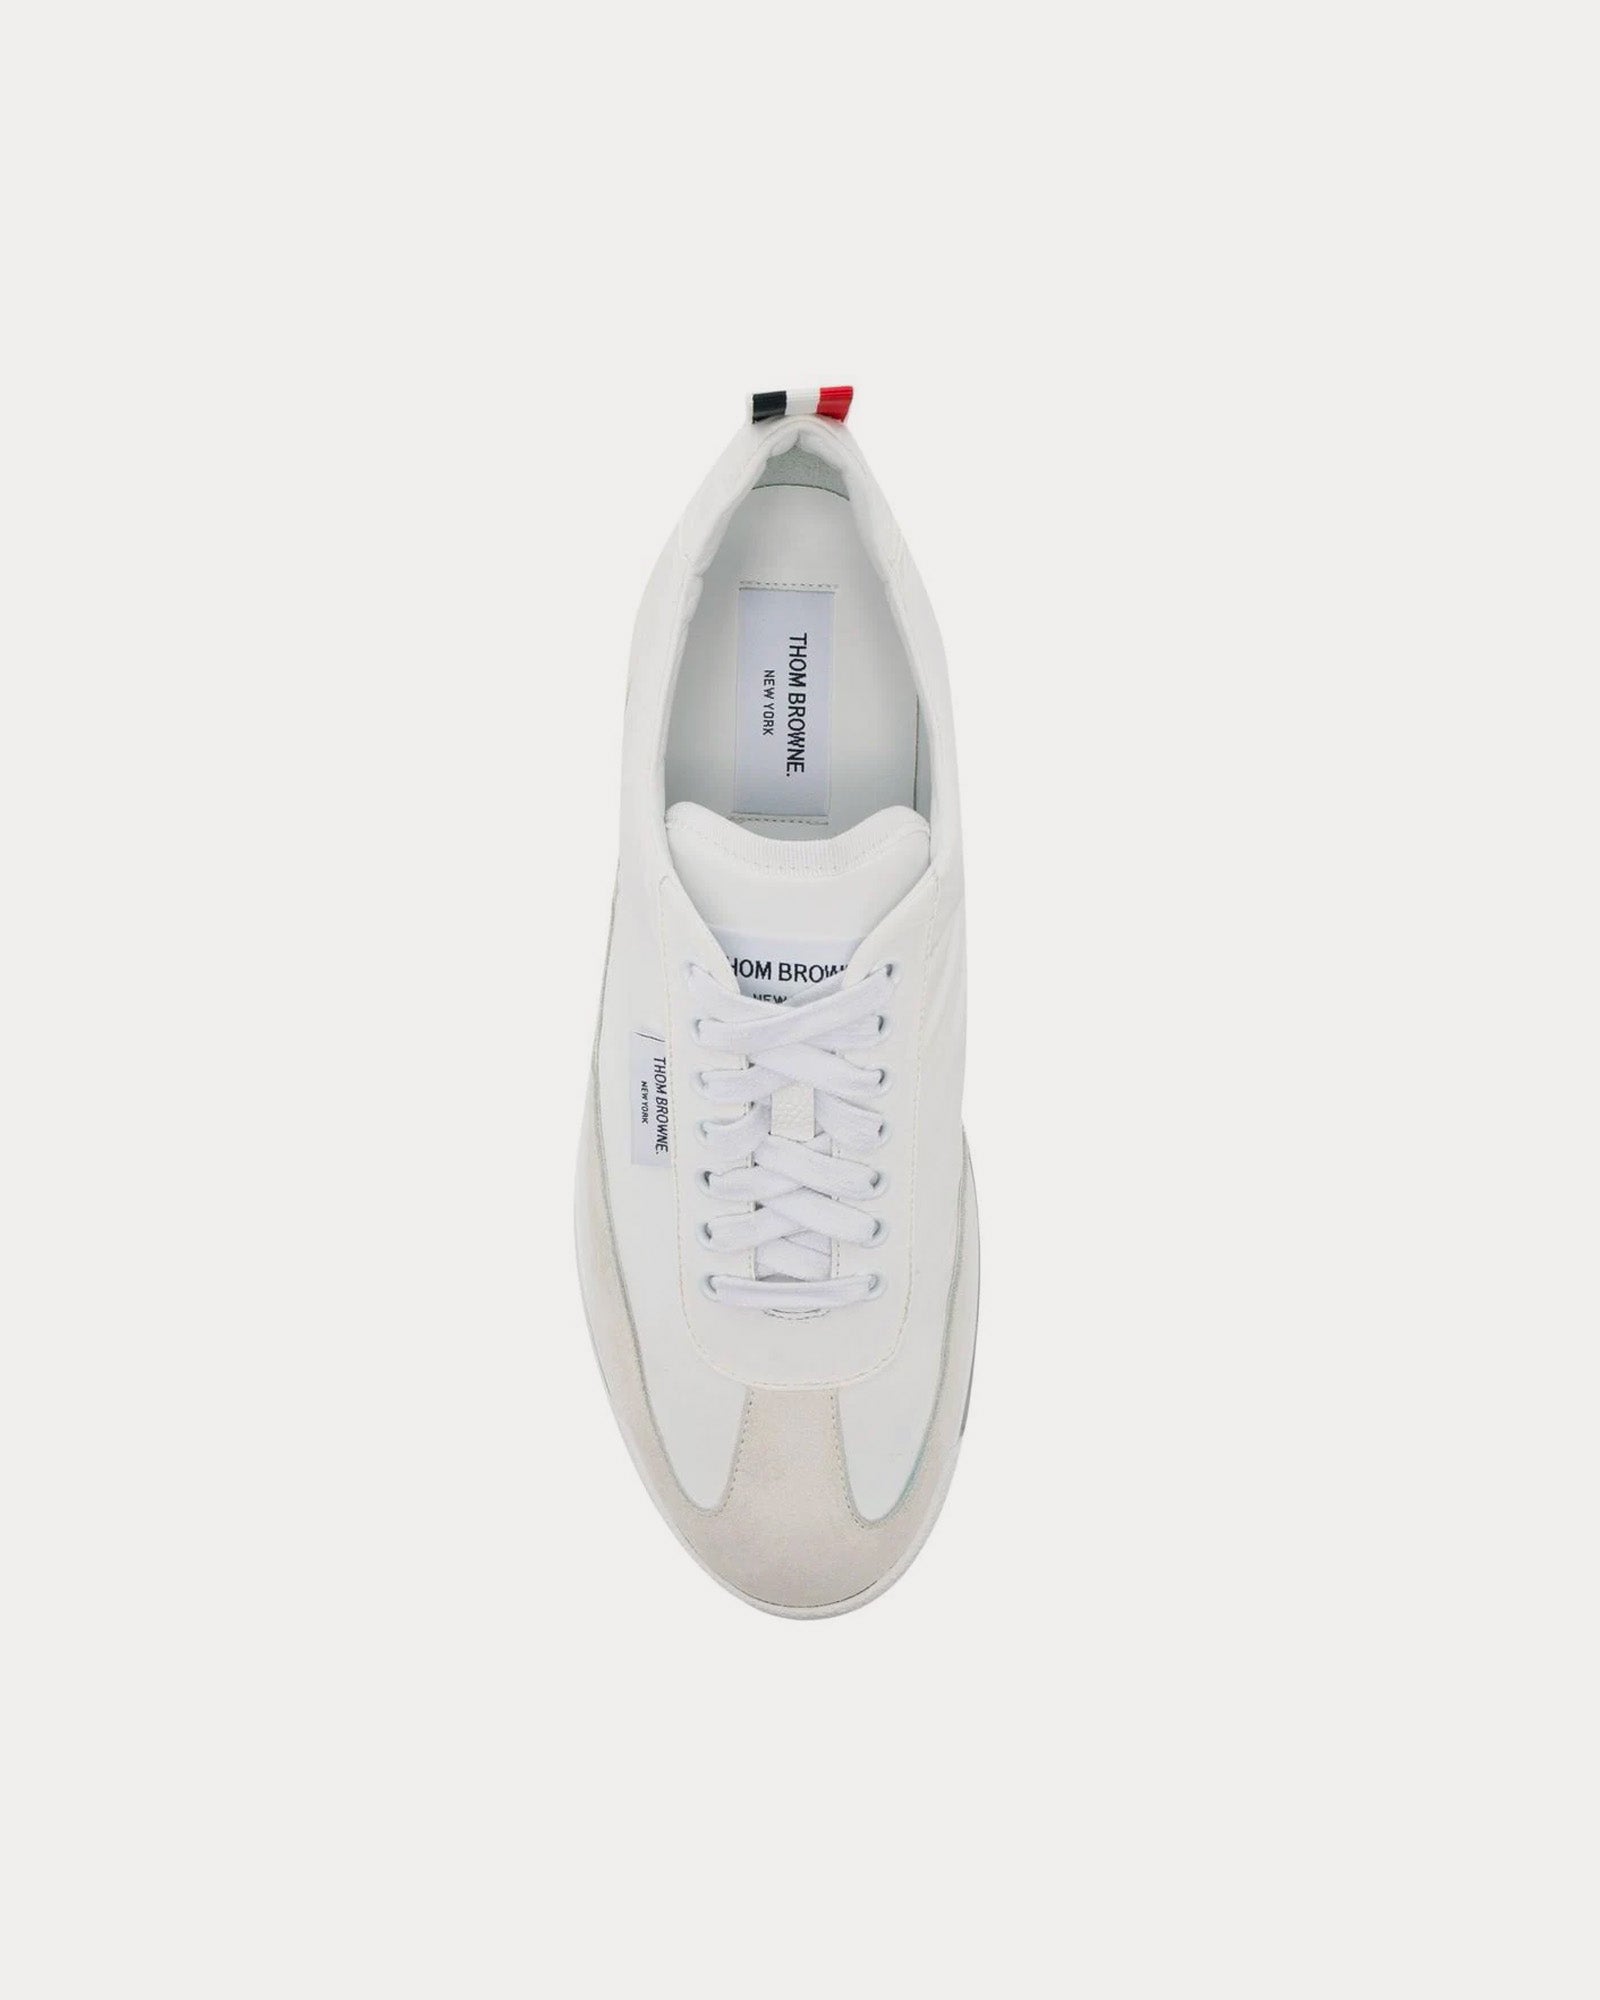 Thom Browne - Tech Runner Clear Sole Nylon White Low Top Sneakers